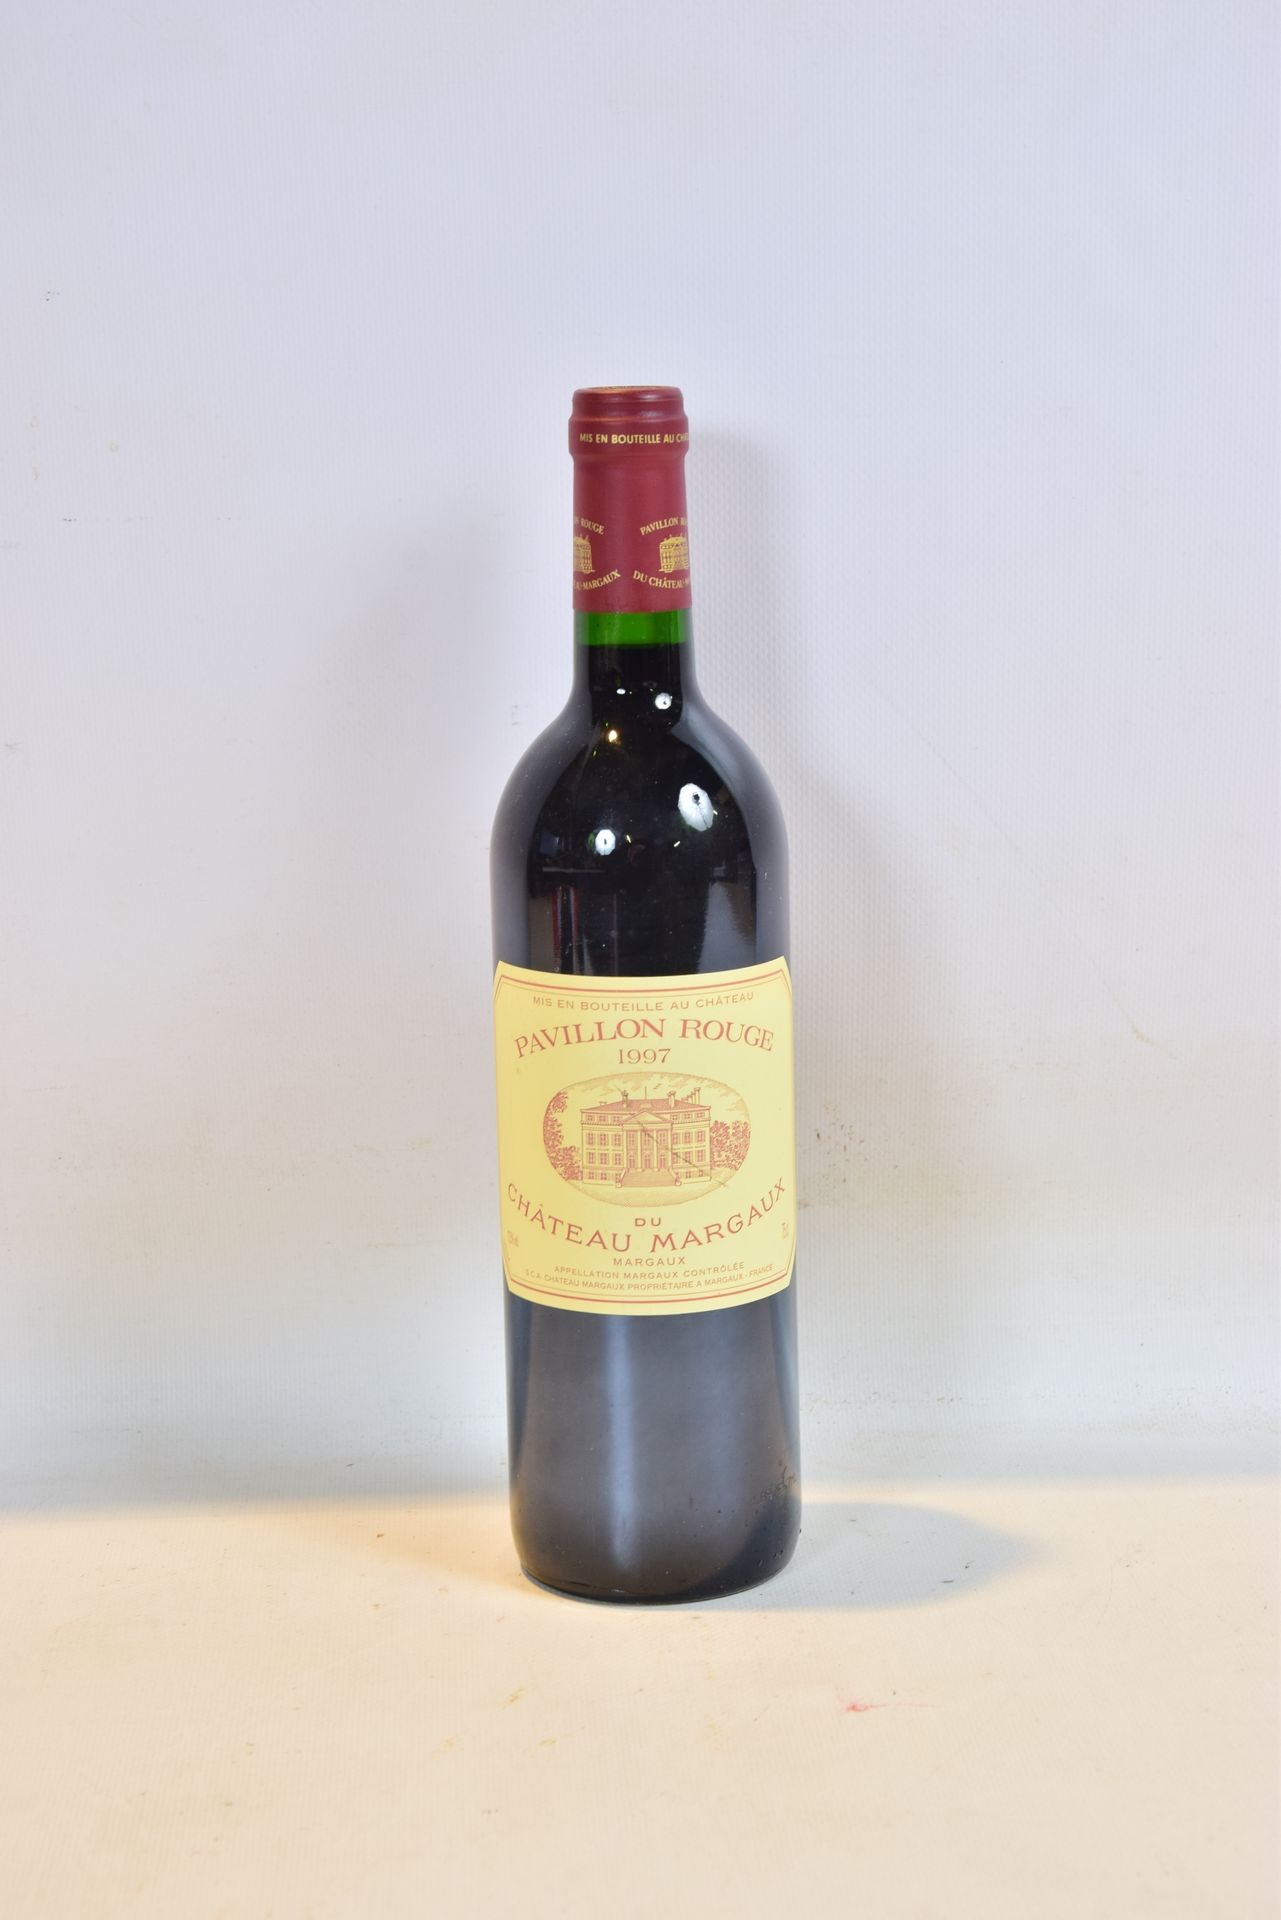 Null 1 Blle PAVILLON ROUGE du CH. MARGAUX Margaux 1997

	And. A little stained. &hellip;